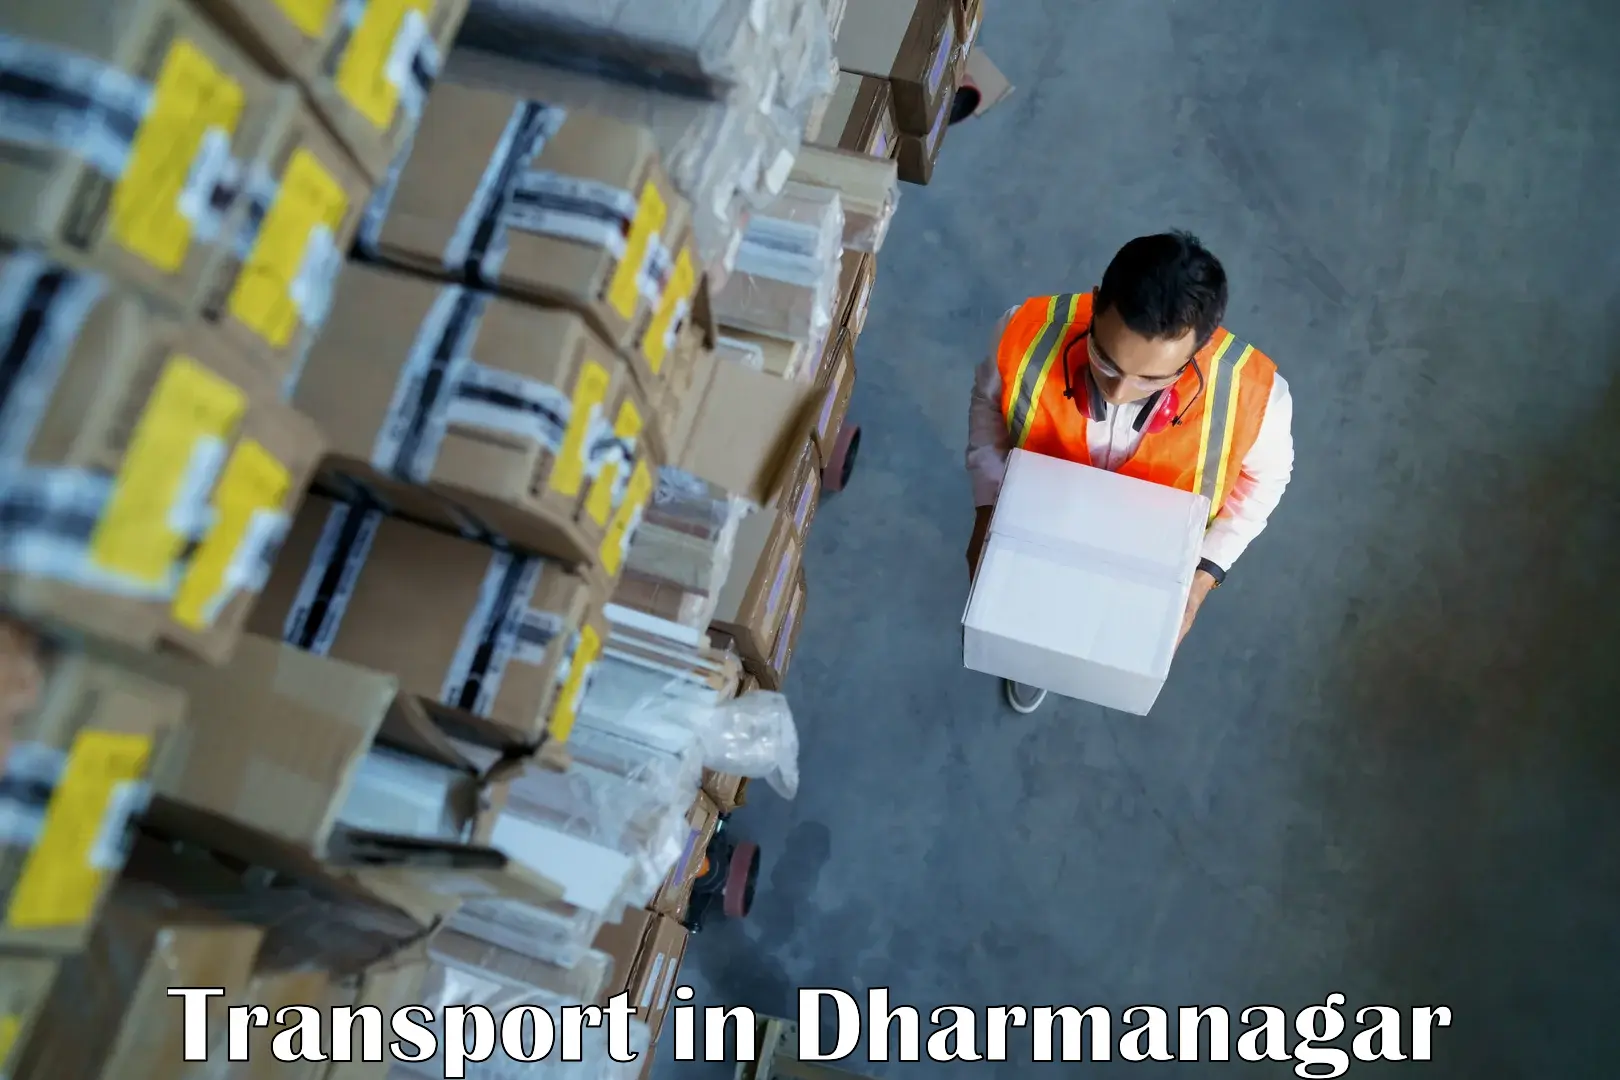 Nationwide transport services in Dharmanagar